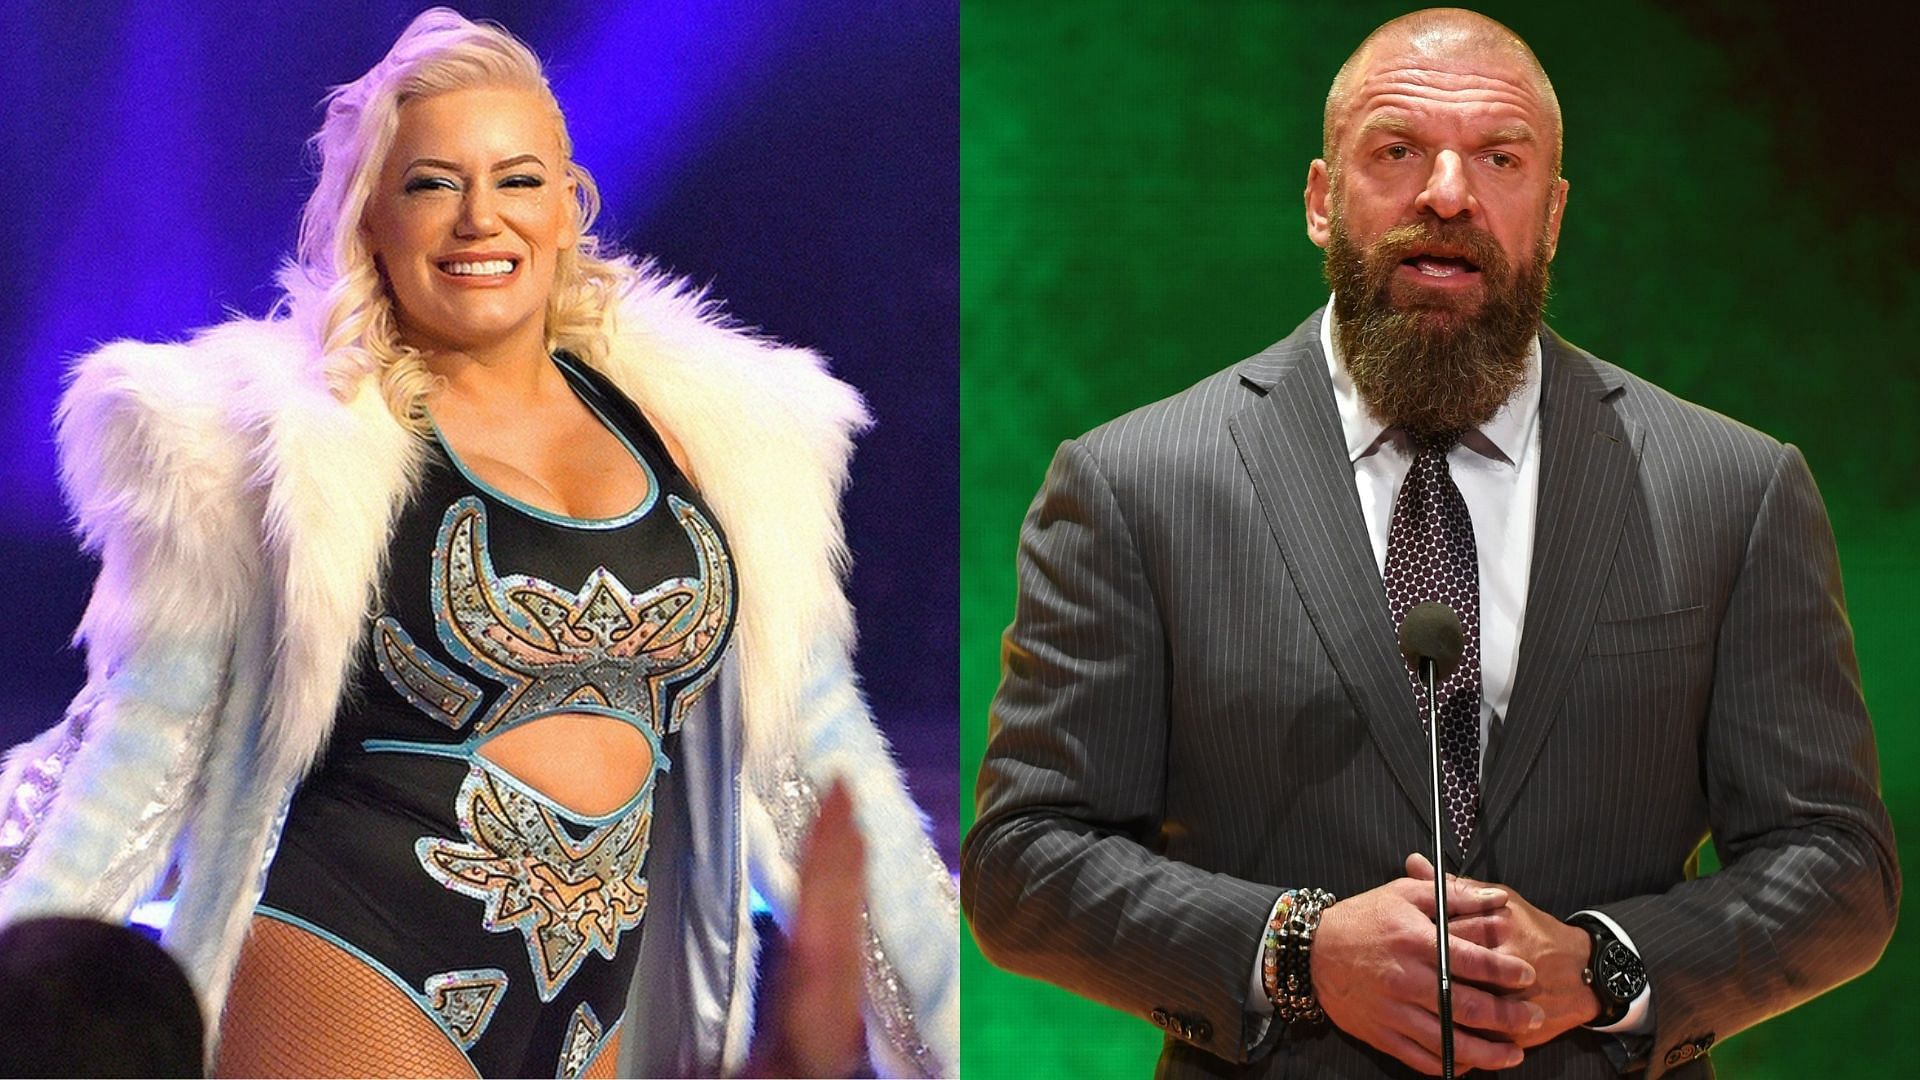 Could Triple H book Taya Valkyrie better in WWE?